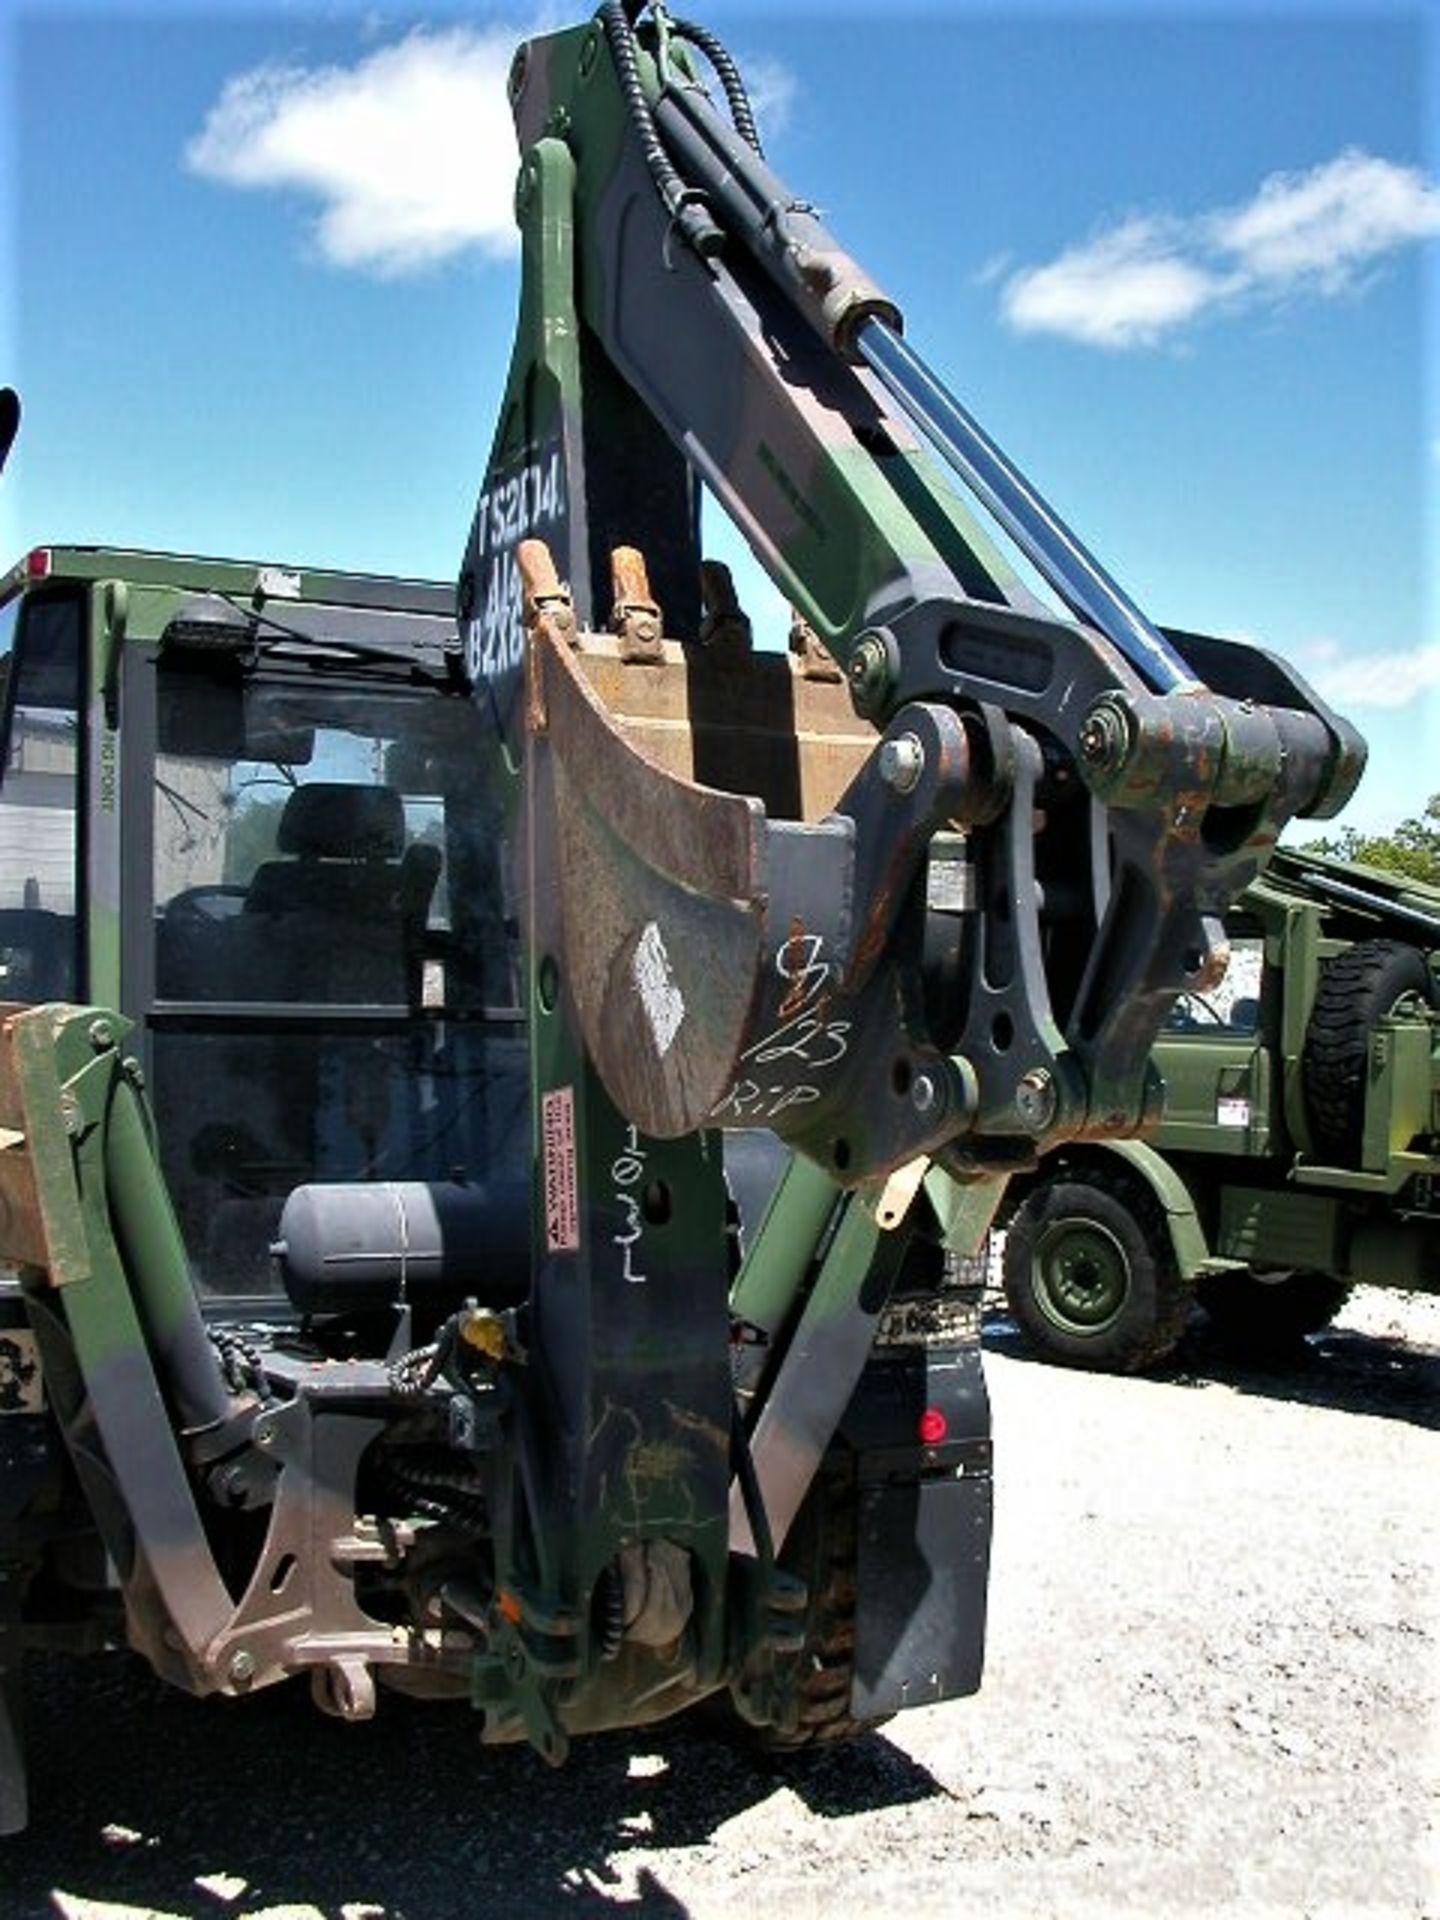 IHMEE - Military High Mobility Engineering Vehicle/Excavator - (3124 Miles) - Excellent Condition! - Image 5 of 16